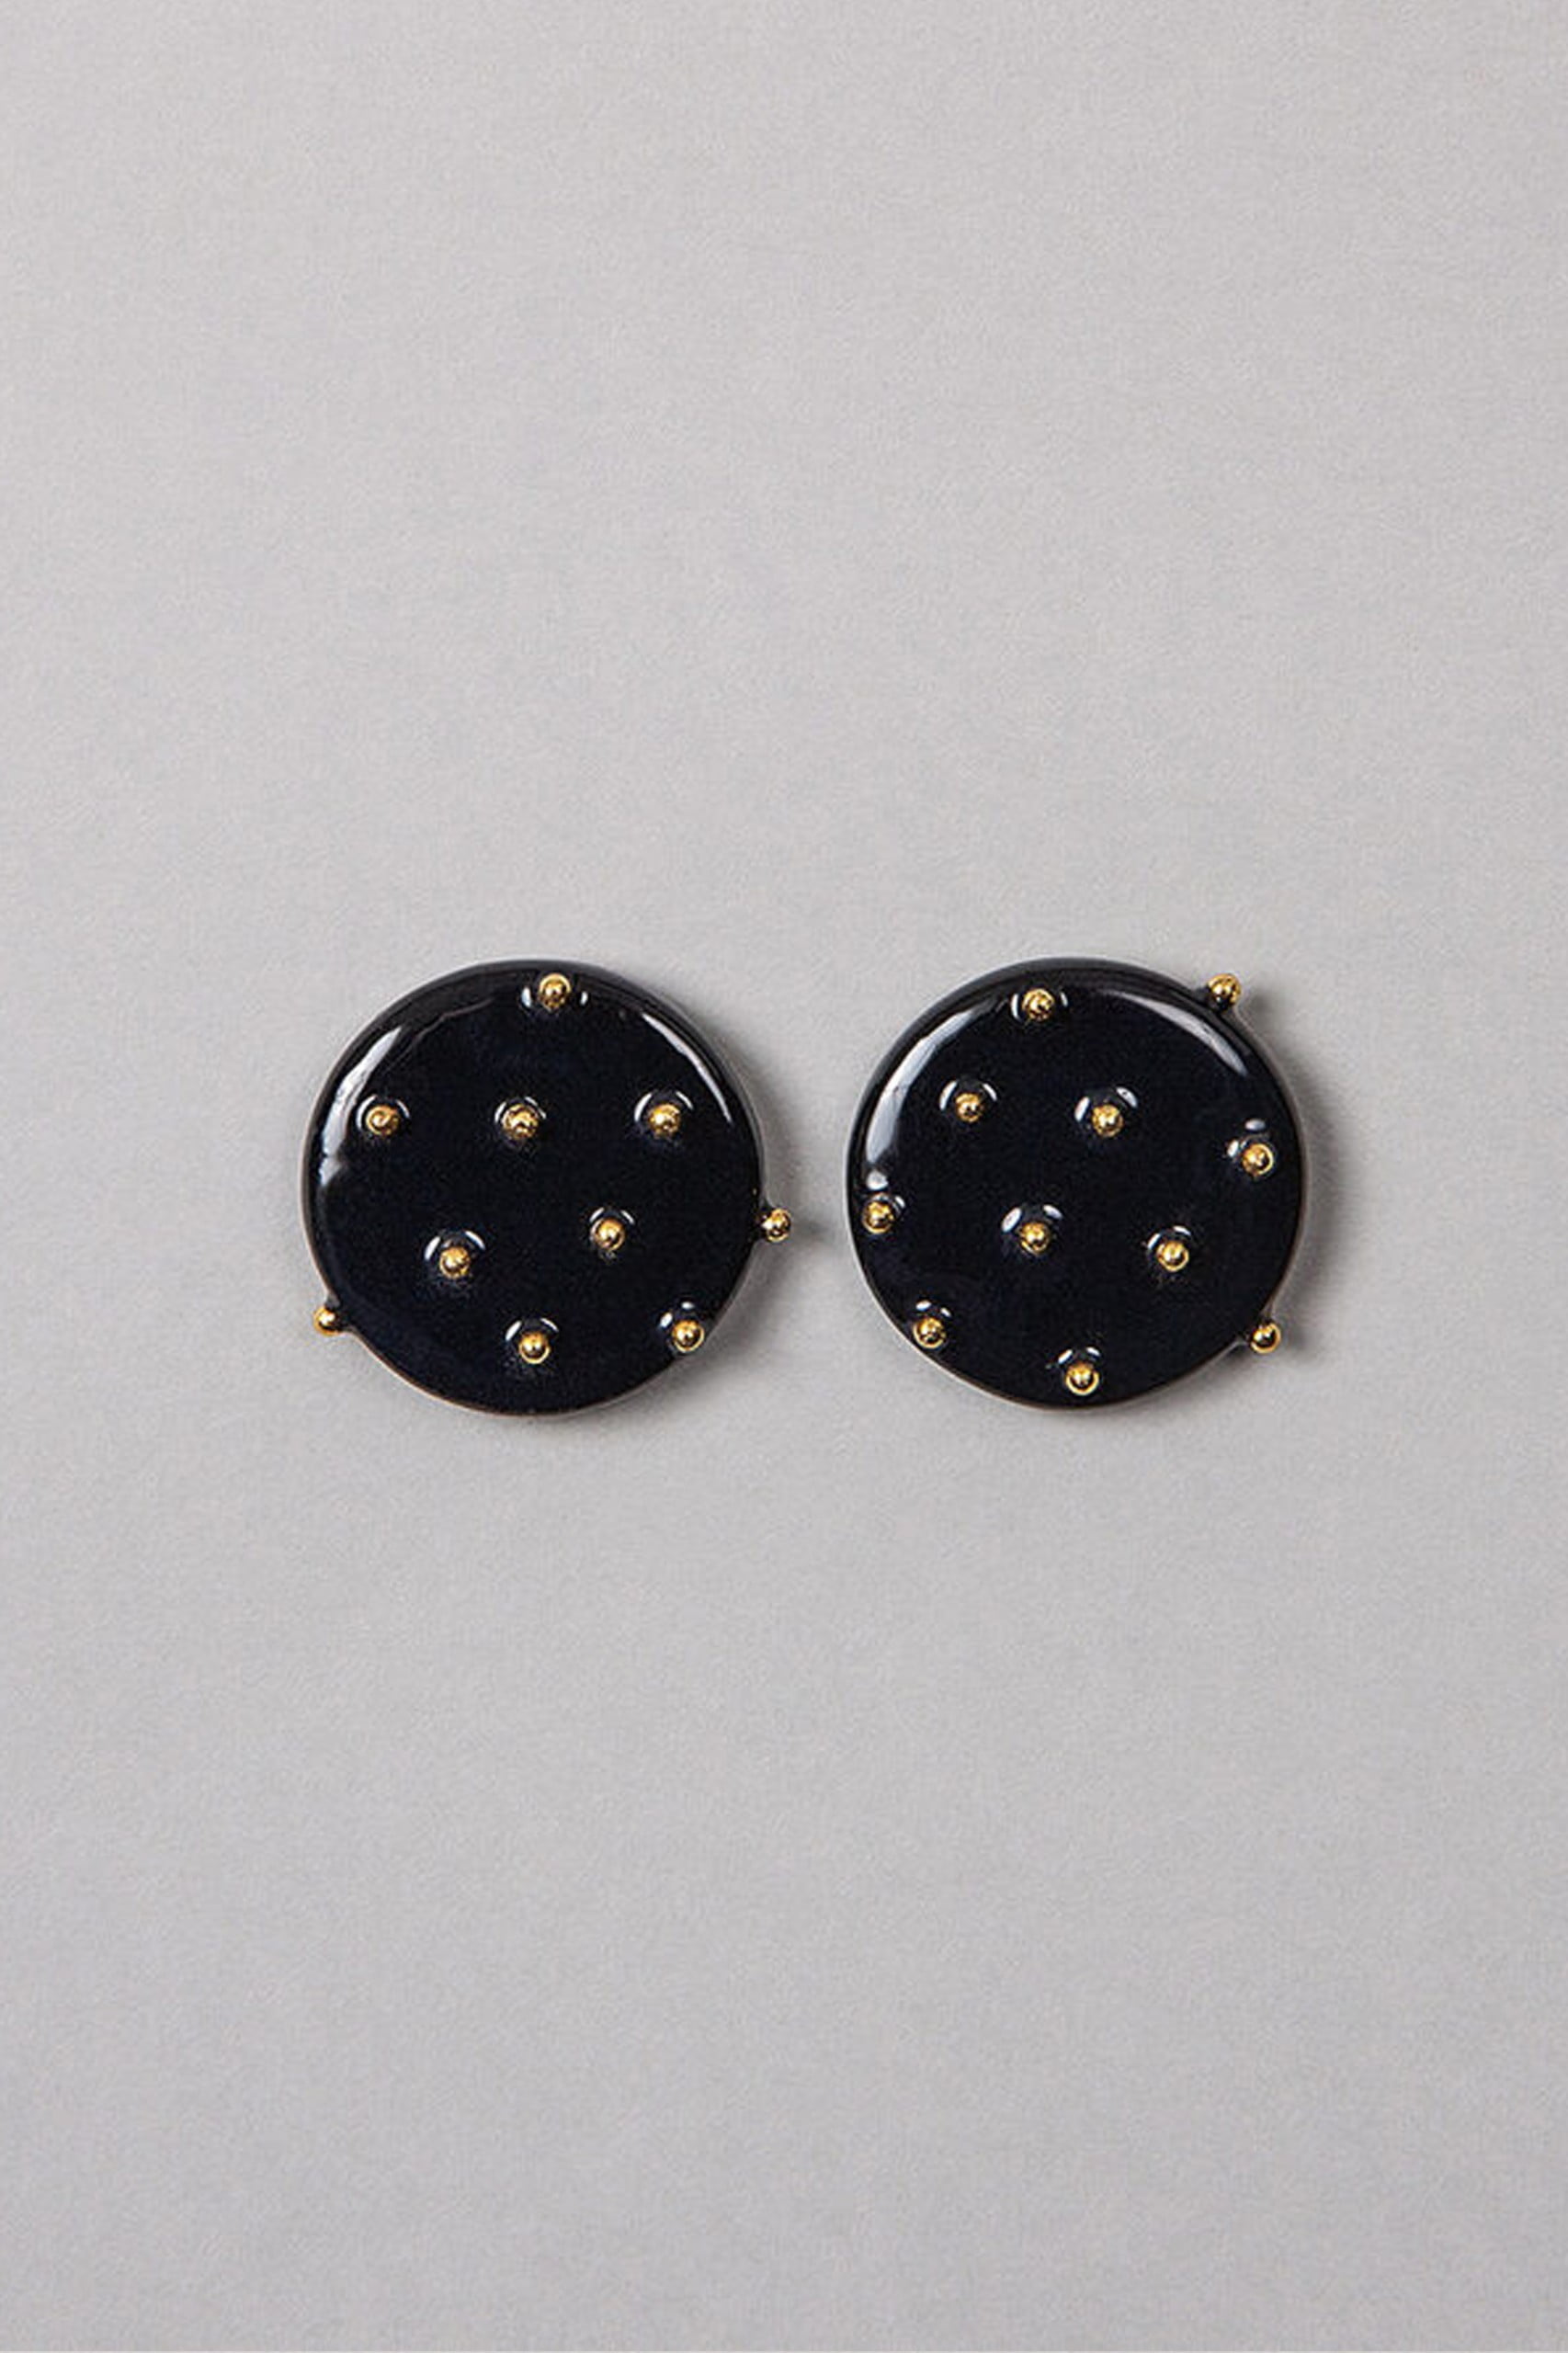 ABE Earrings black circle / gold accents